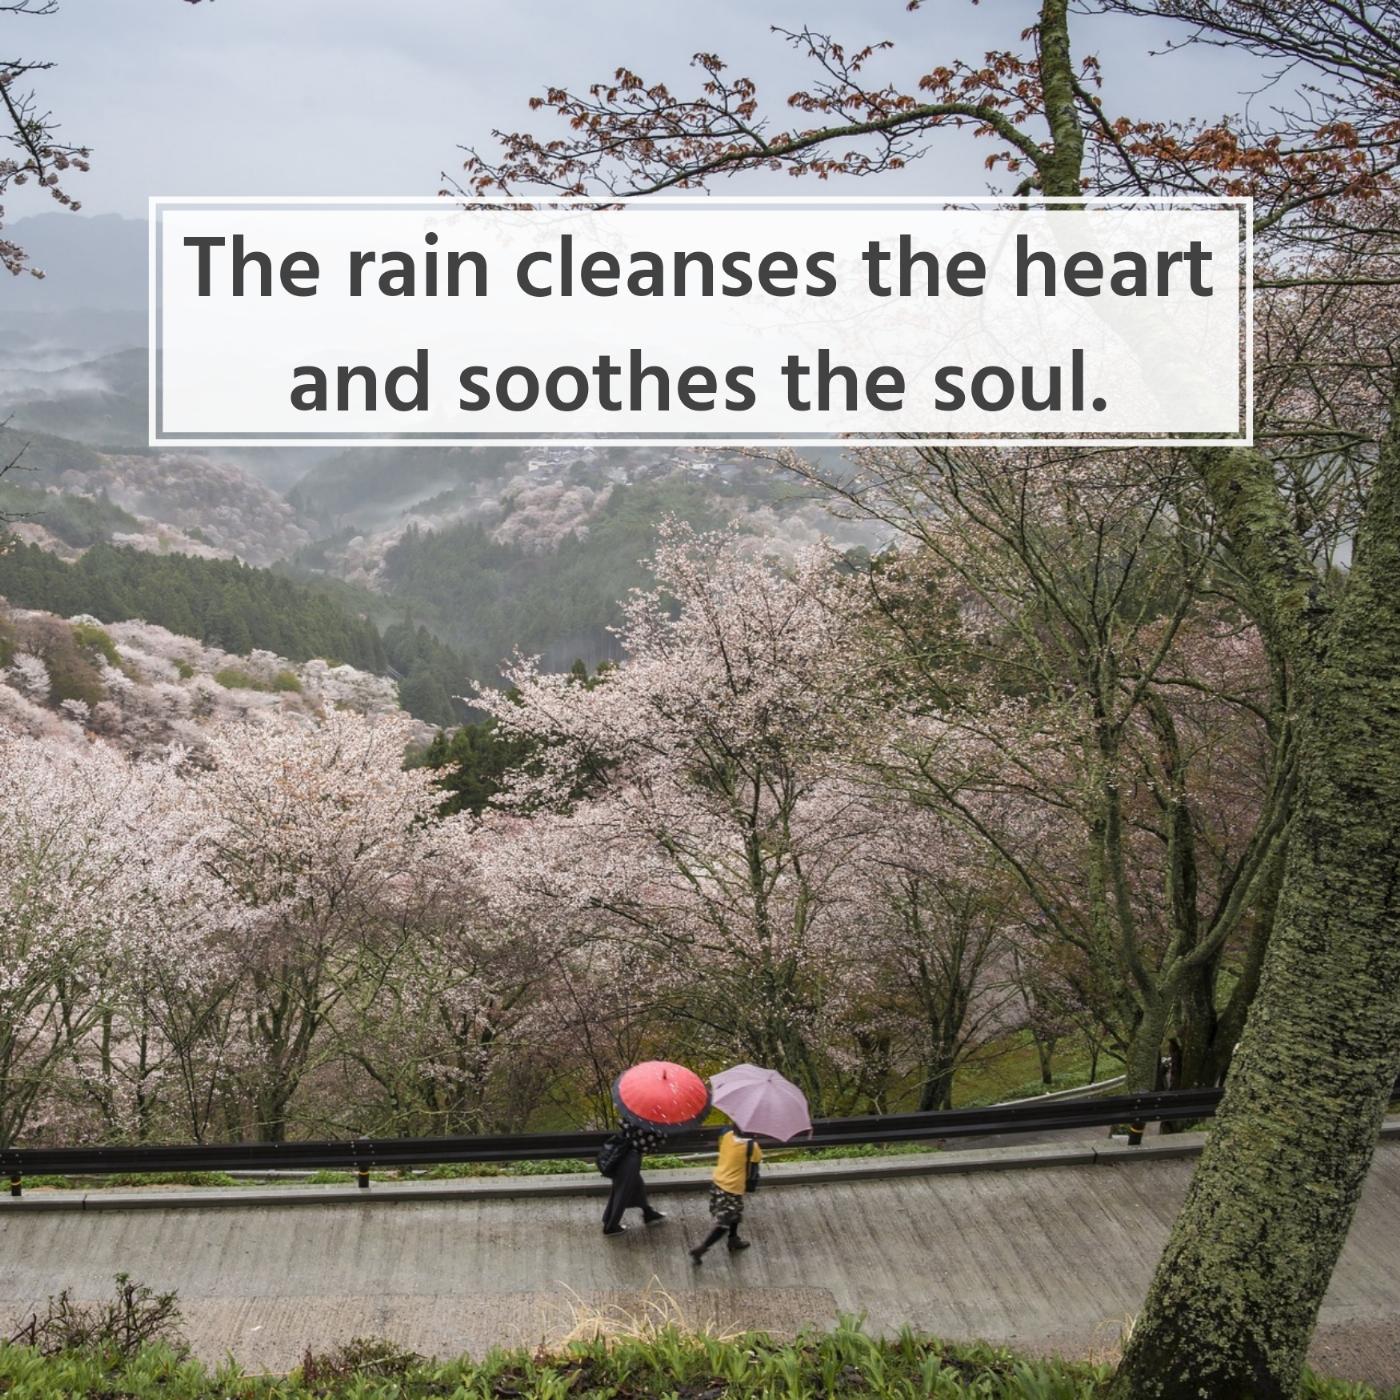 The rain cleanses the heart and soothes the soul